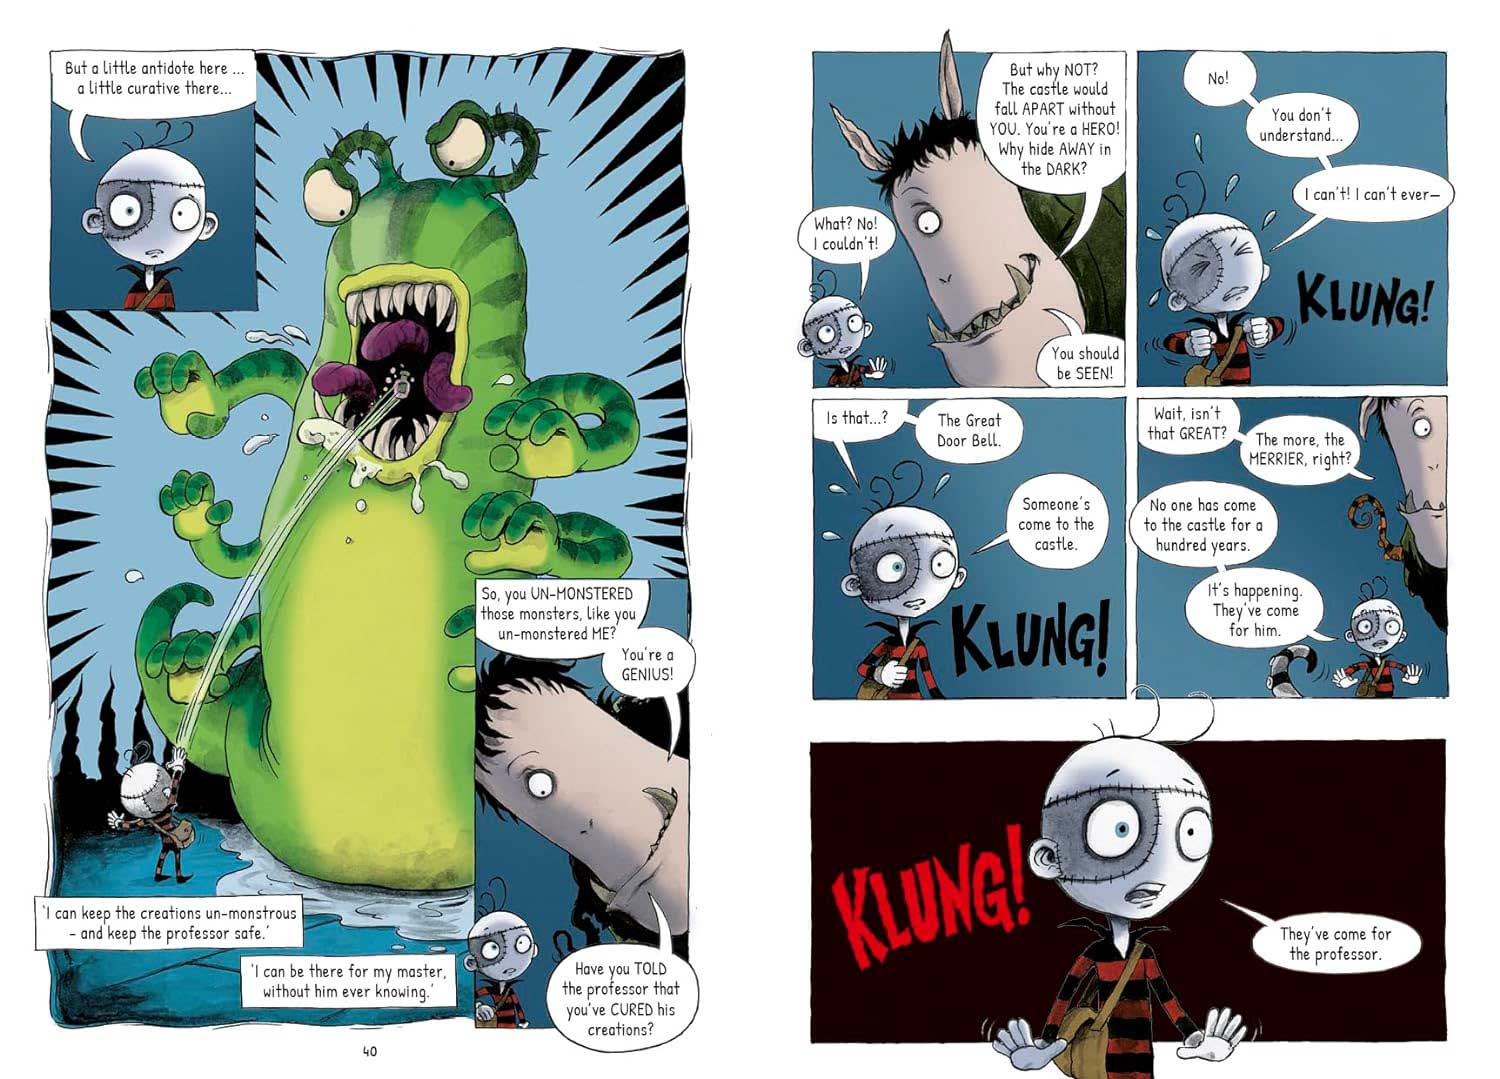 Stich Head the Graphic Novel by Guy Bass and Pete Williamson spread 4